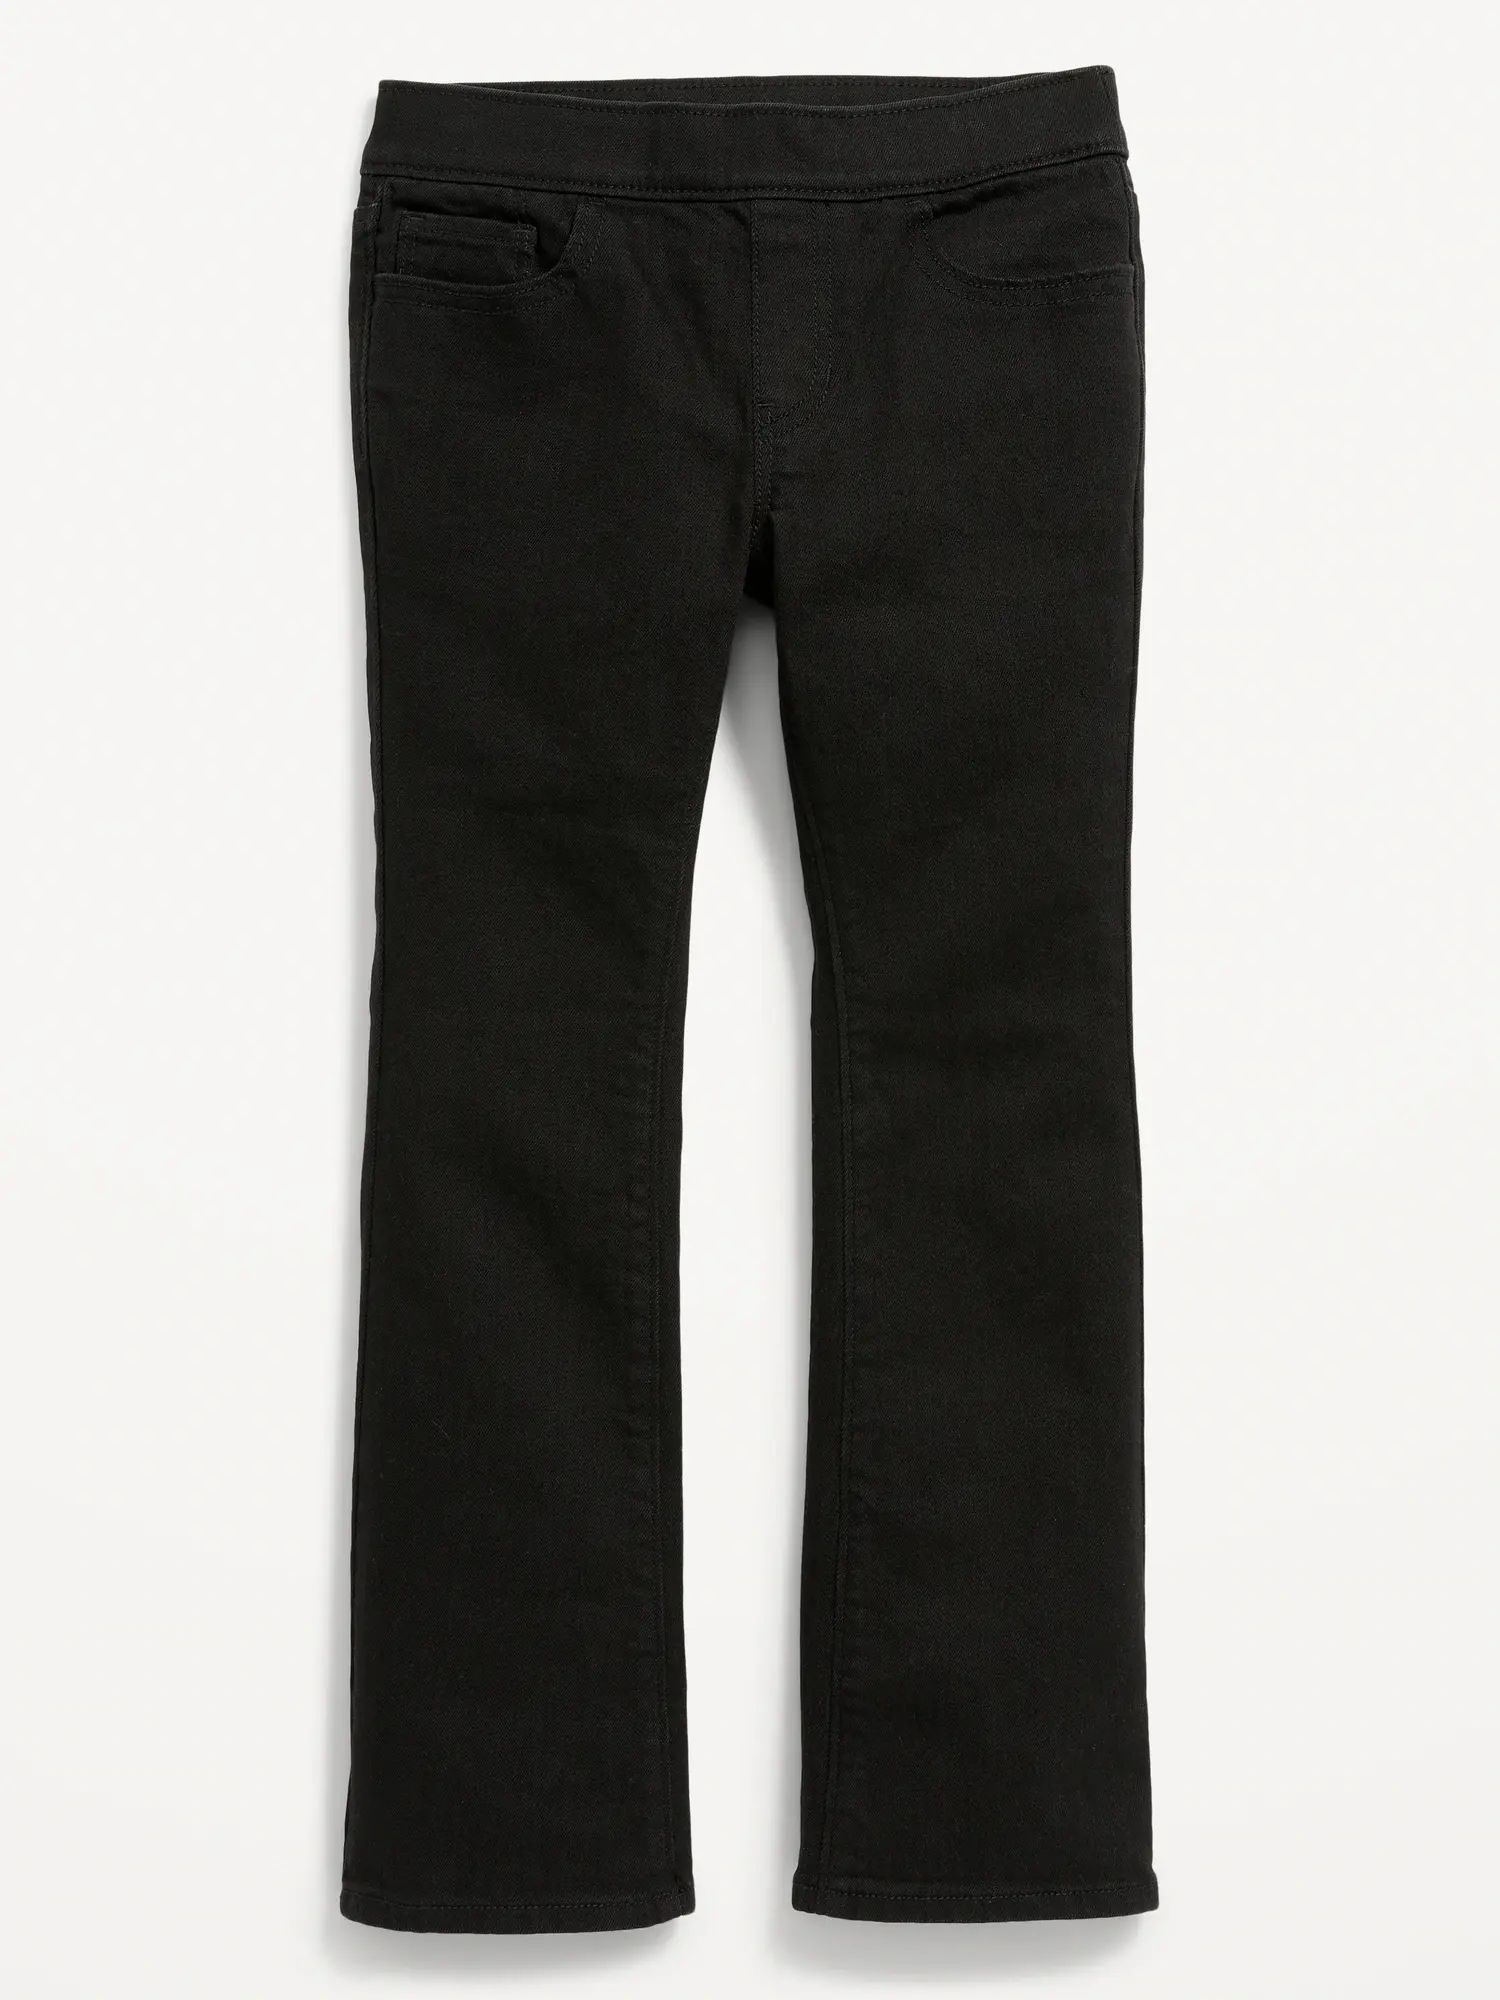 Old Navy Wow Boot-Cut Pull-On Jeans for Girls black. 1